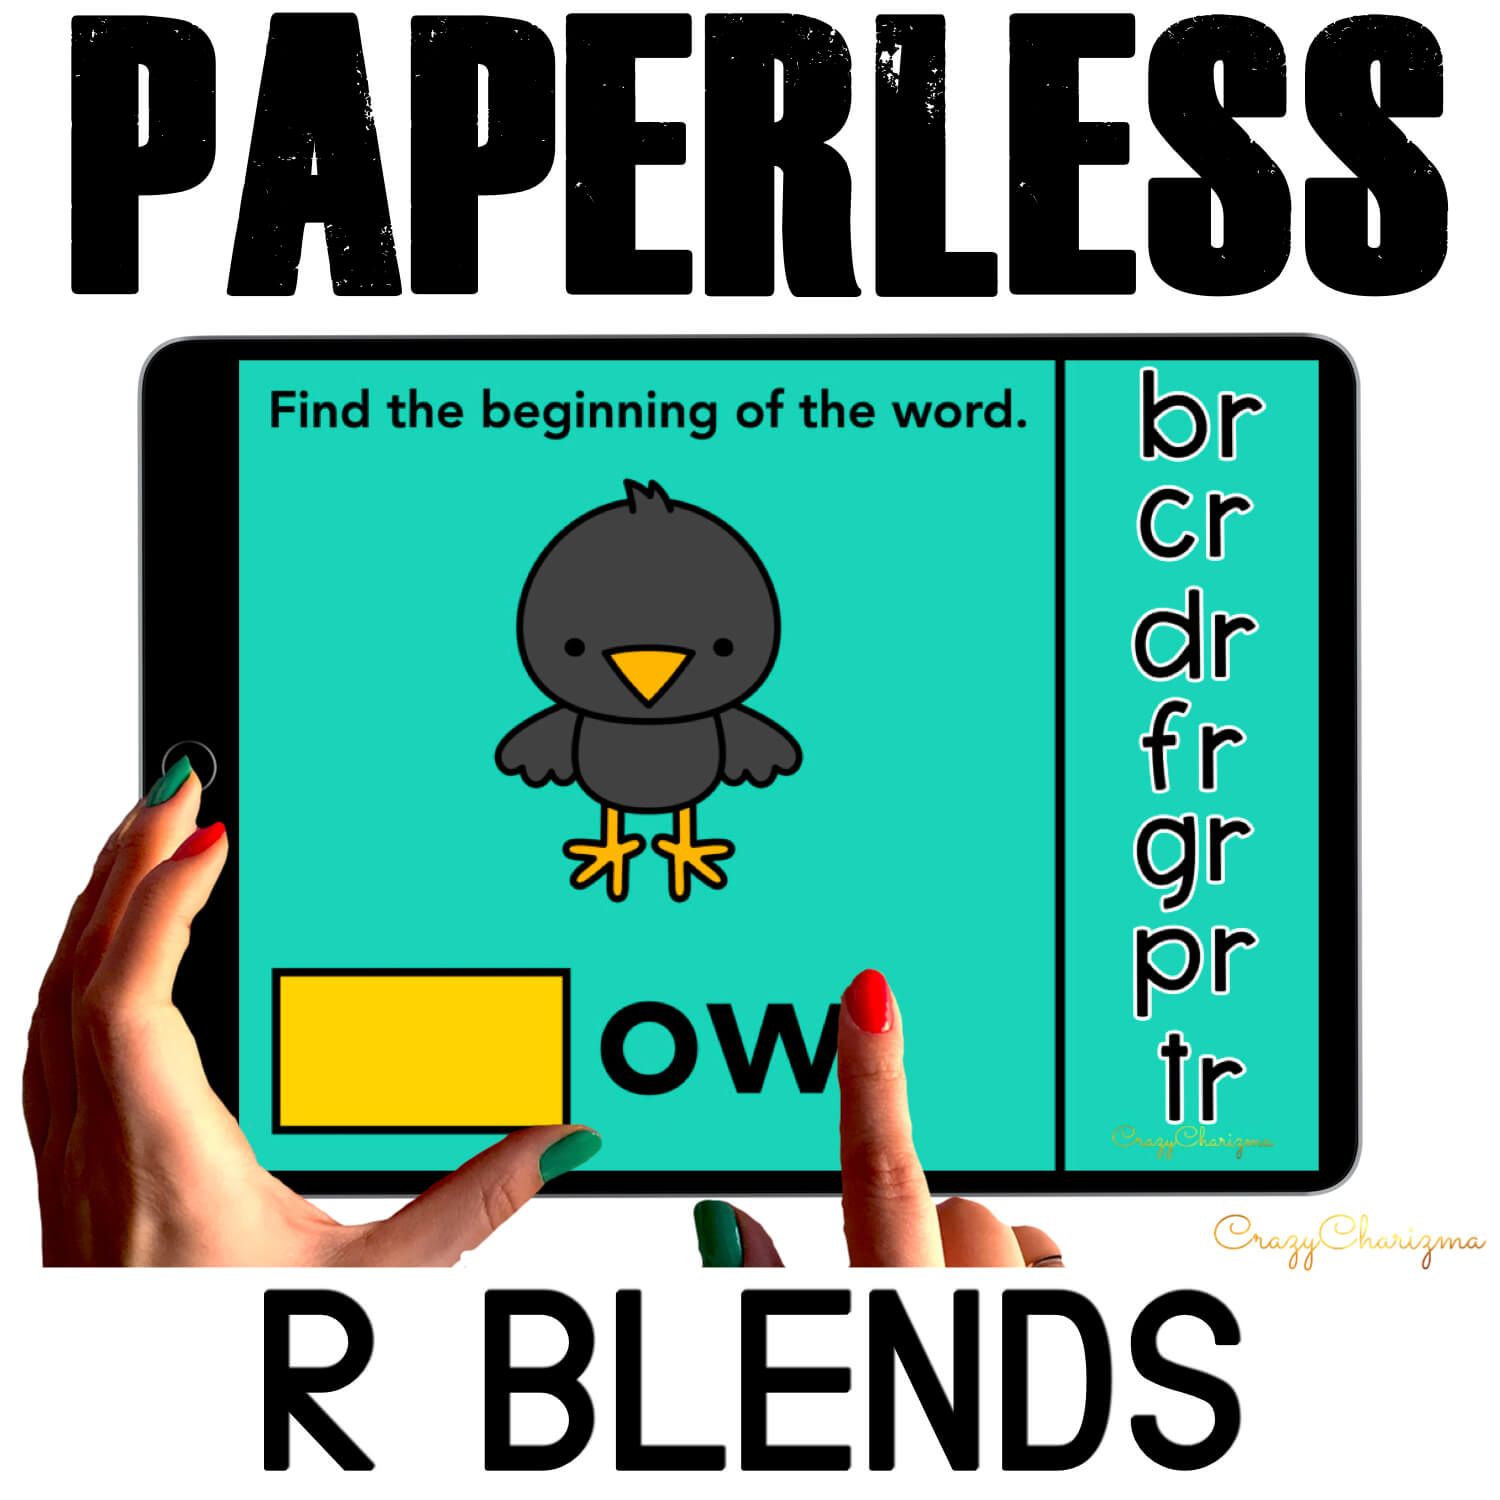 Need to practice beginning R BLENDS in a fun way? Check out these interactive activities for Google Classroom. Kids will drag blends and build the word (images will help).